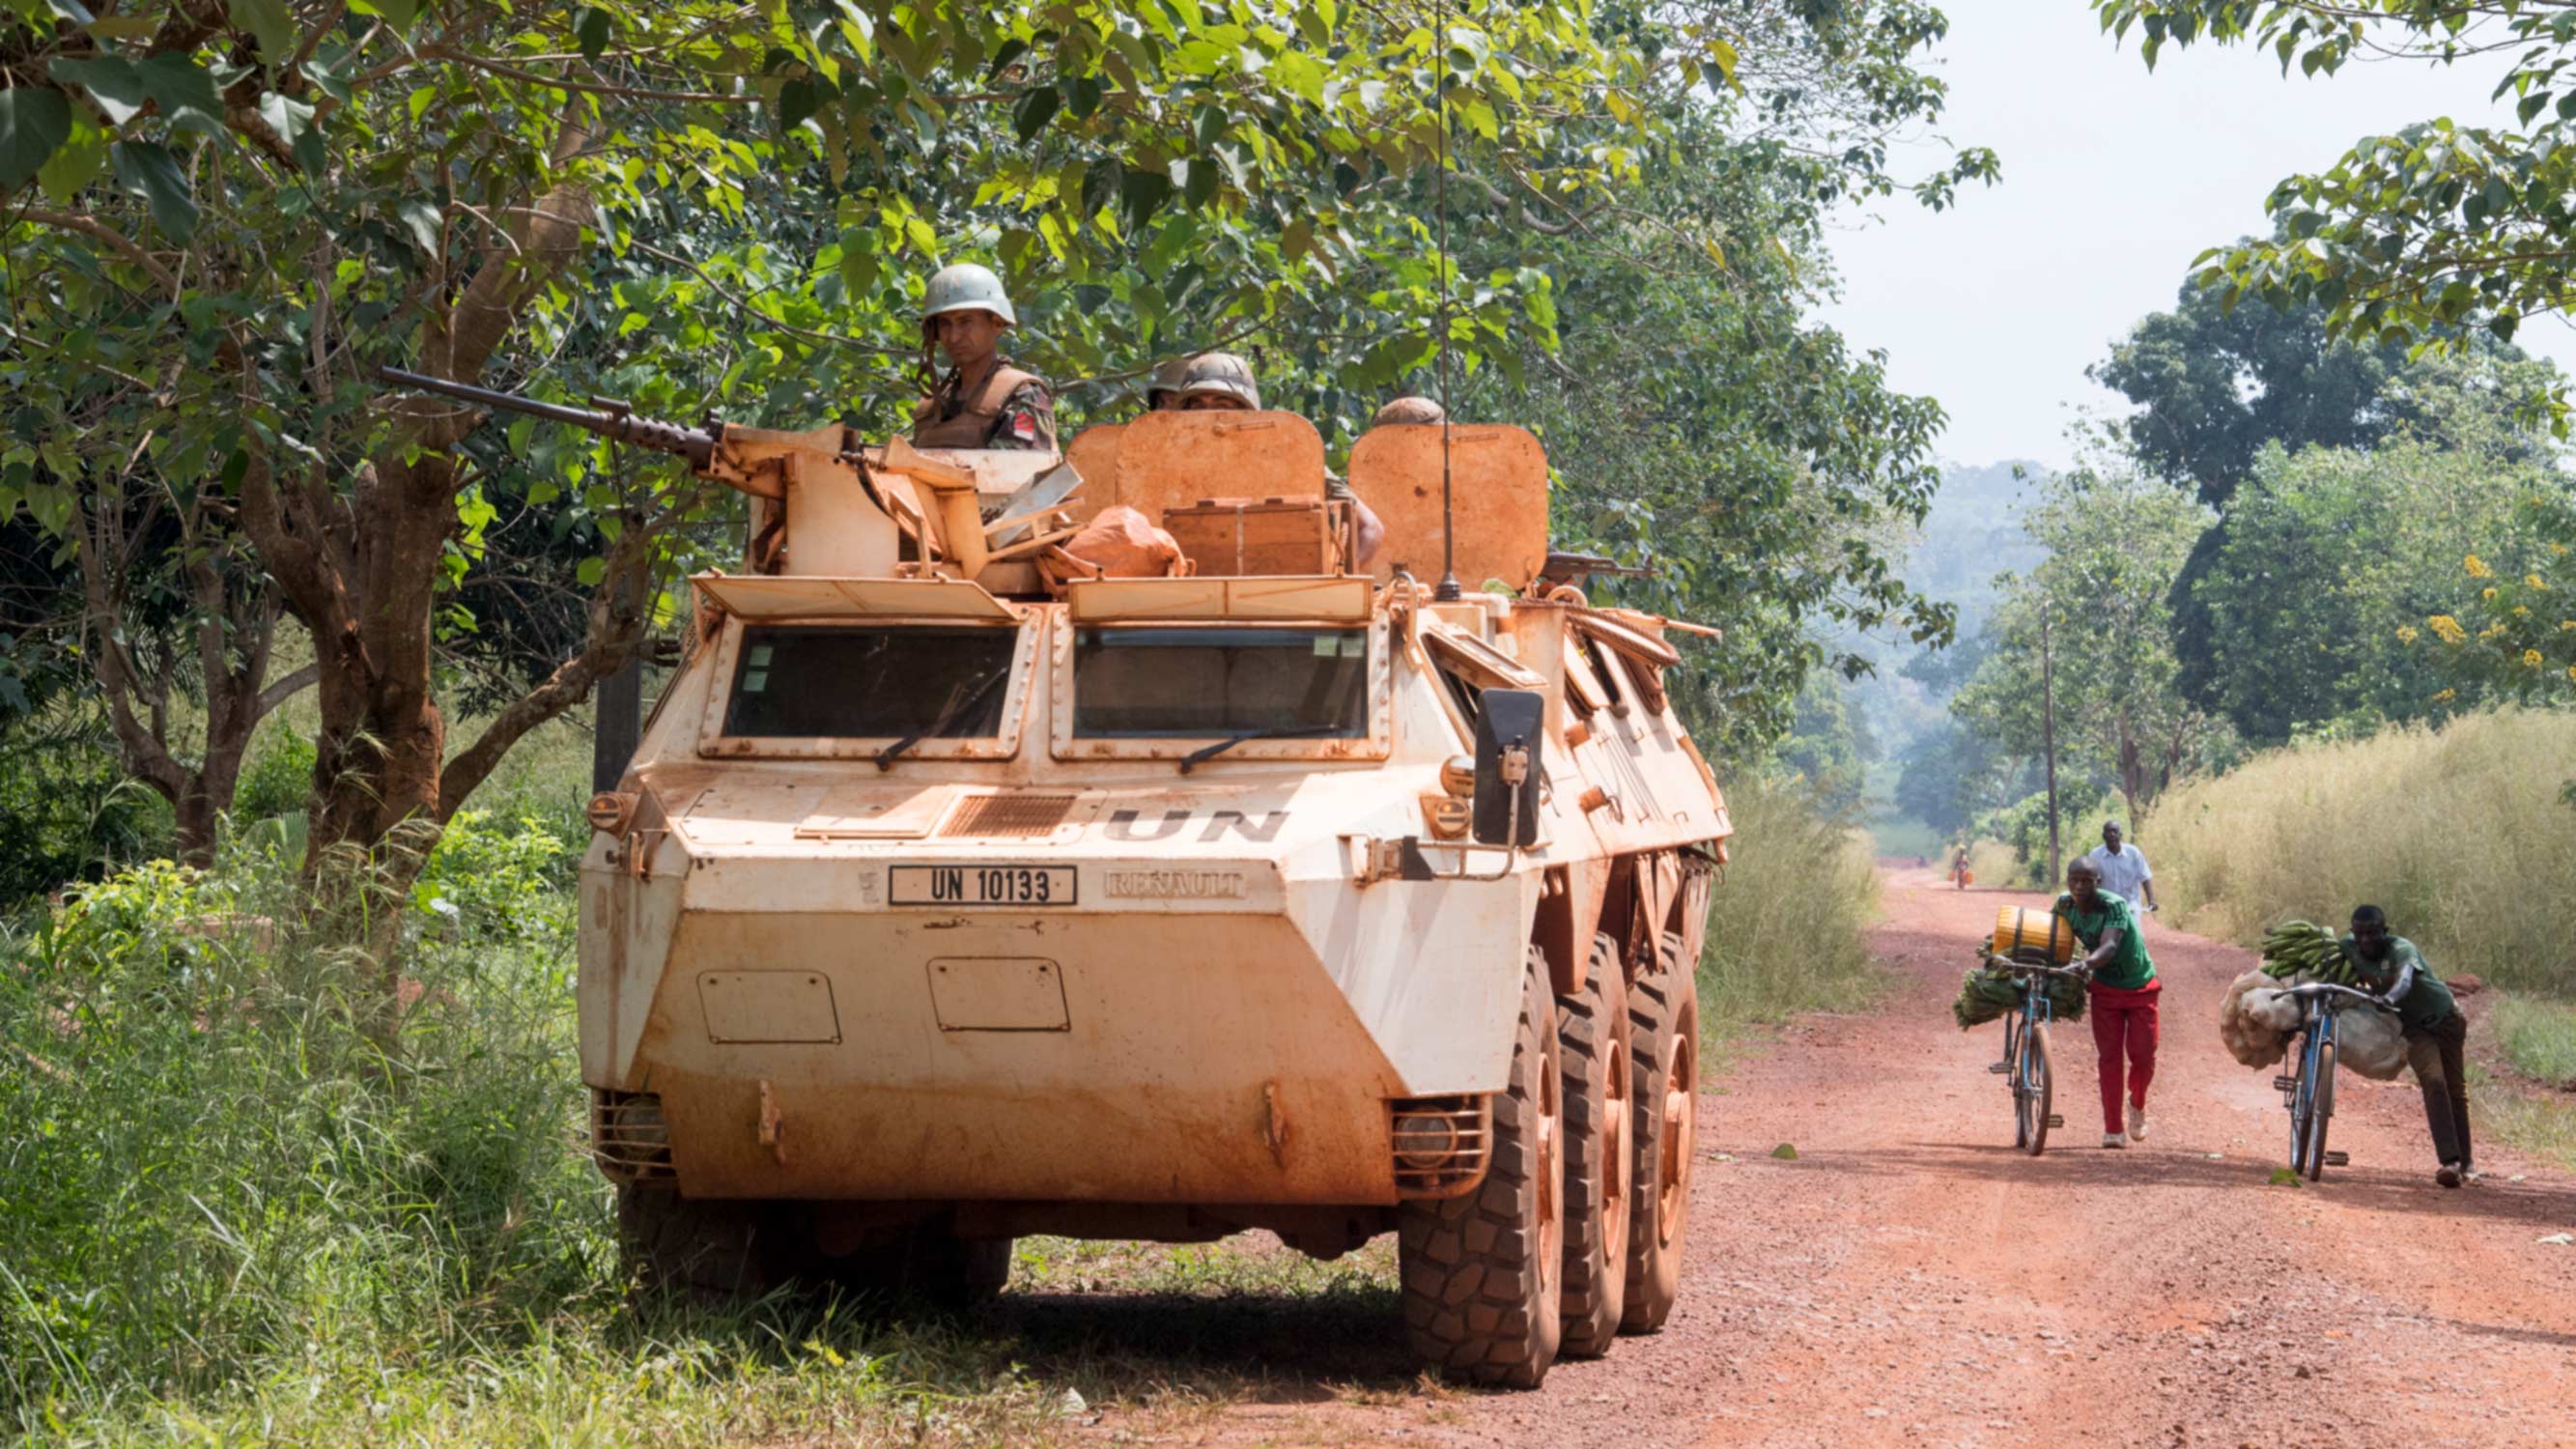 Minusca peacekeepers in Bangassou, Central African Republic